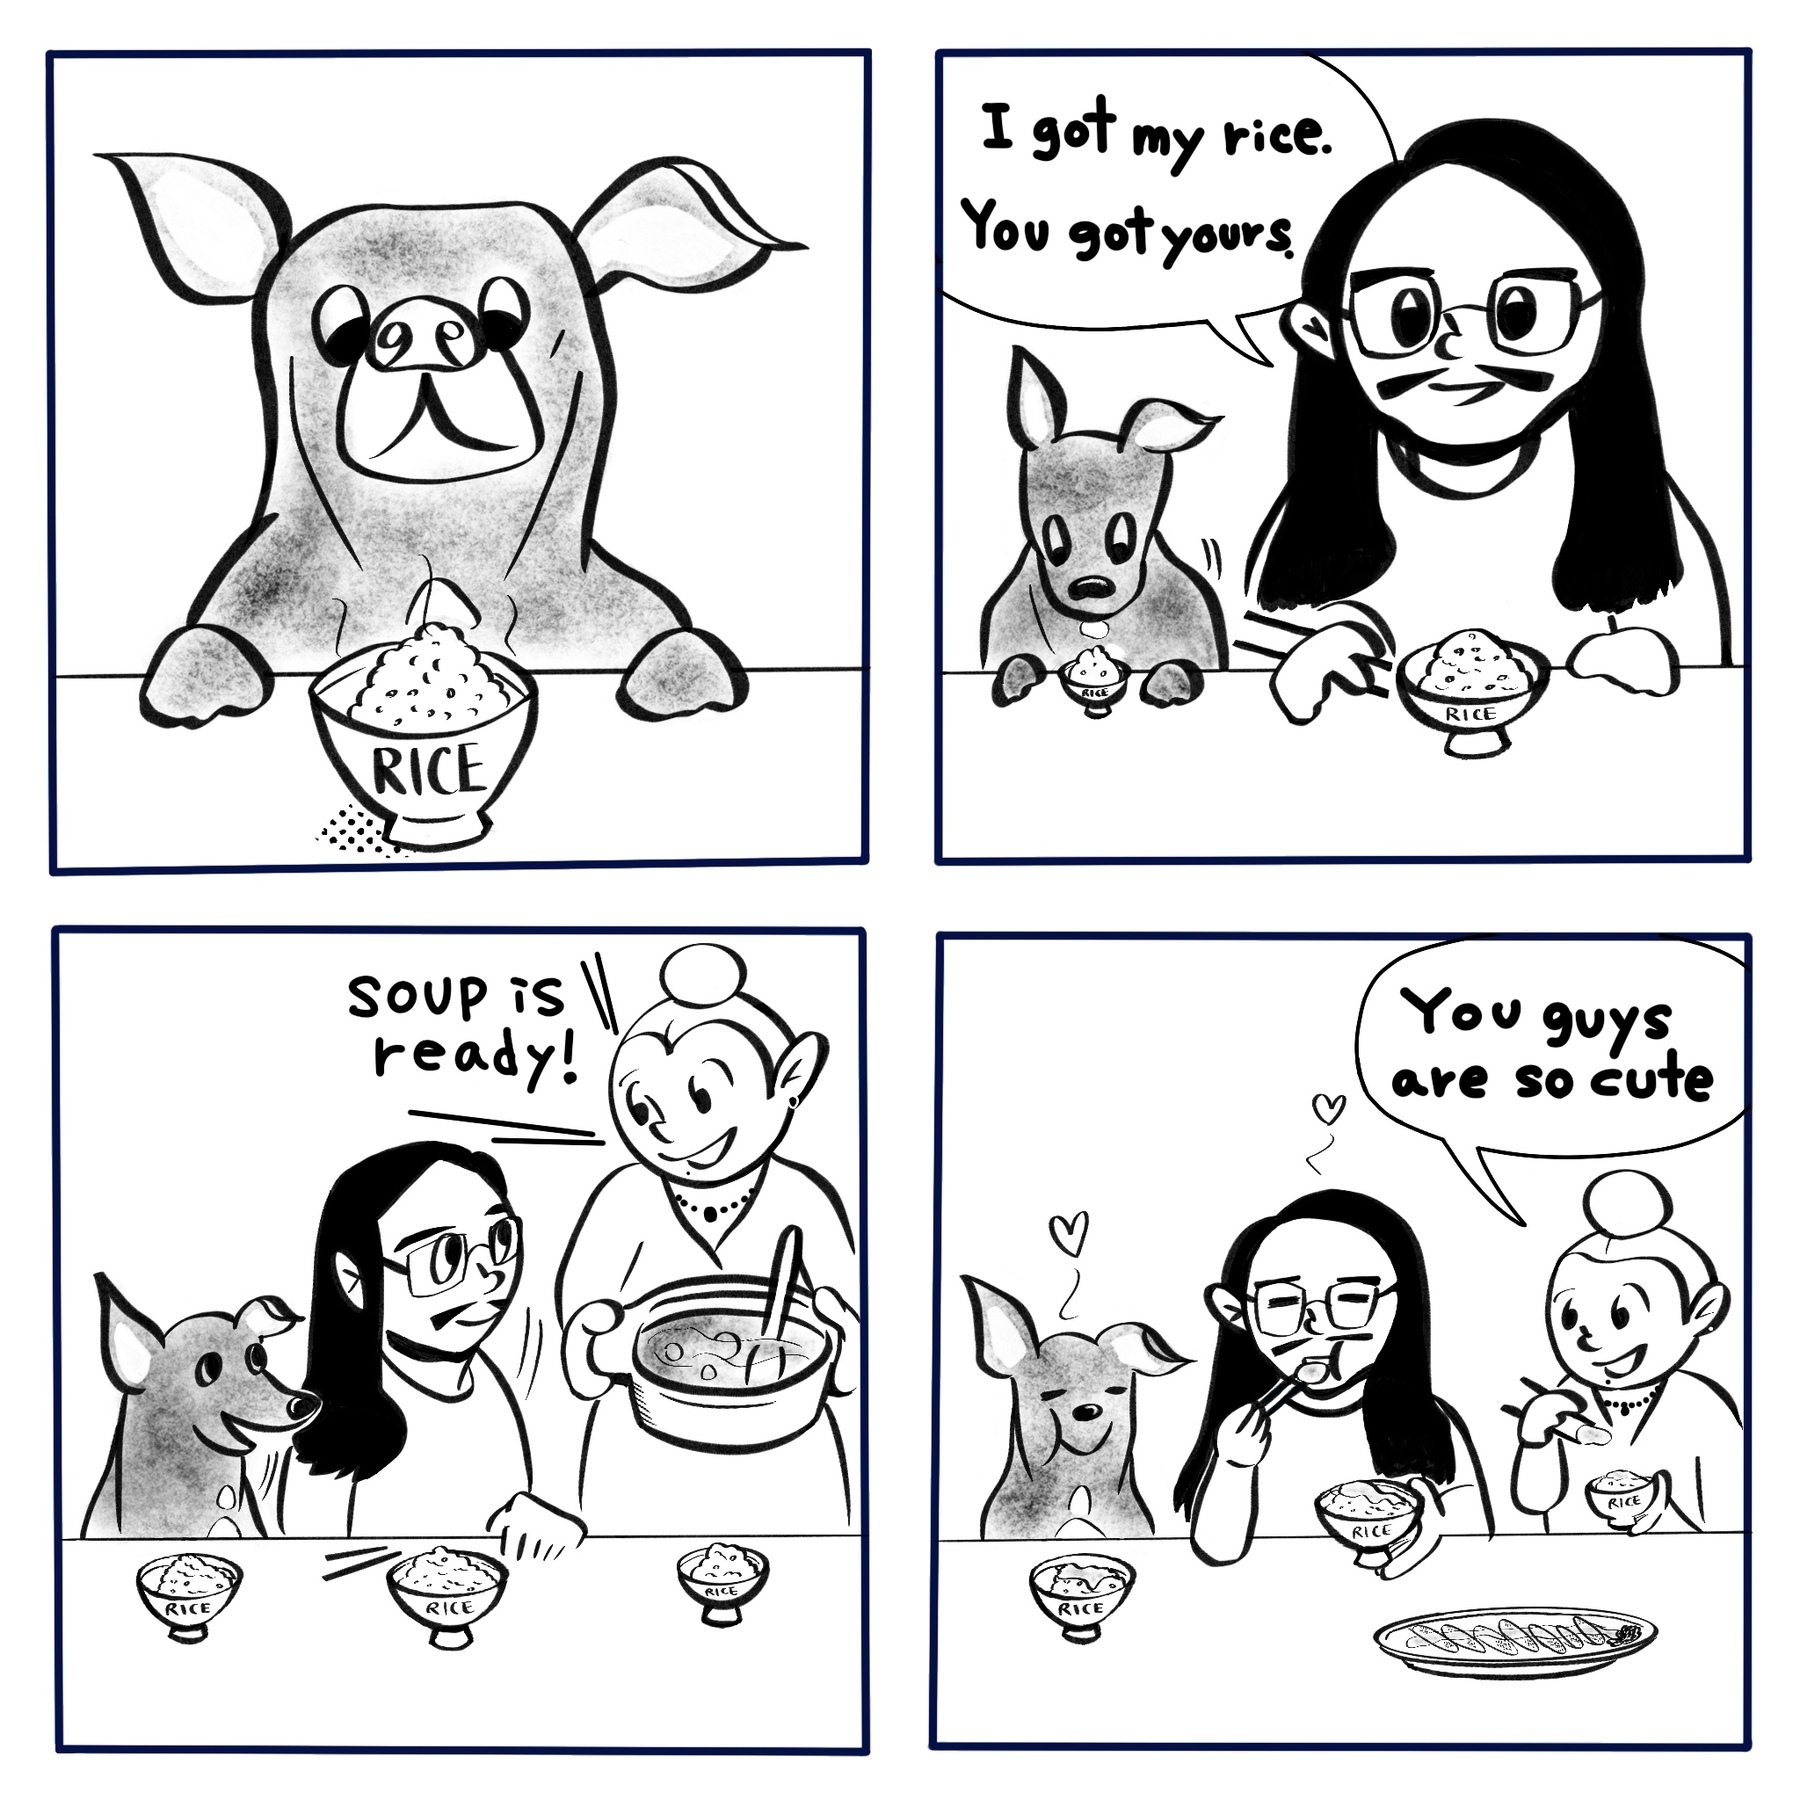 Shiro, the dog, is staring at his food. Then Toni, the owner, is also staring at the rice.
His wife Amber is holding the soup and saying, "It's ready.”
Toni and Shiro are eating their supper of rice and soup with the same look on their faces.
Amber sees them and smiles, "You guys are so cute.
